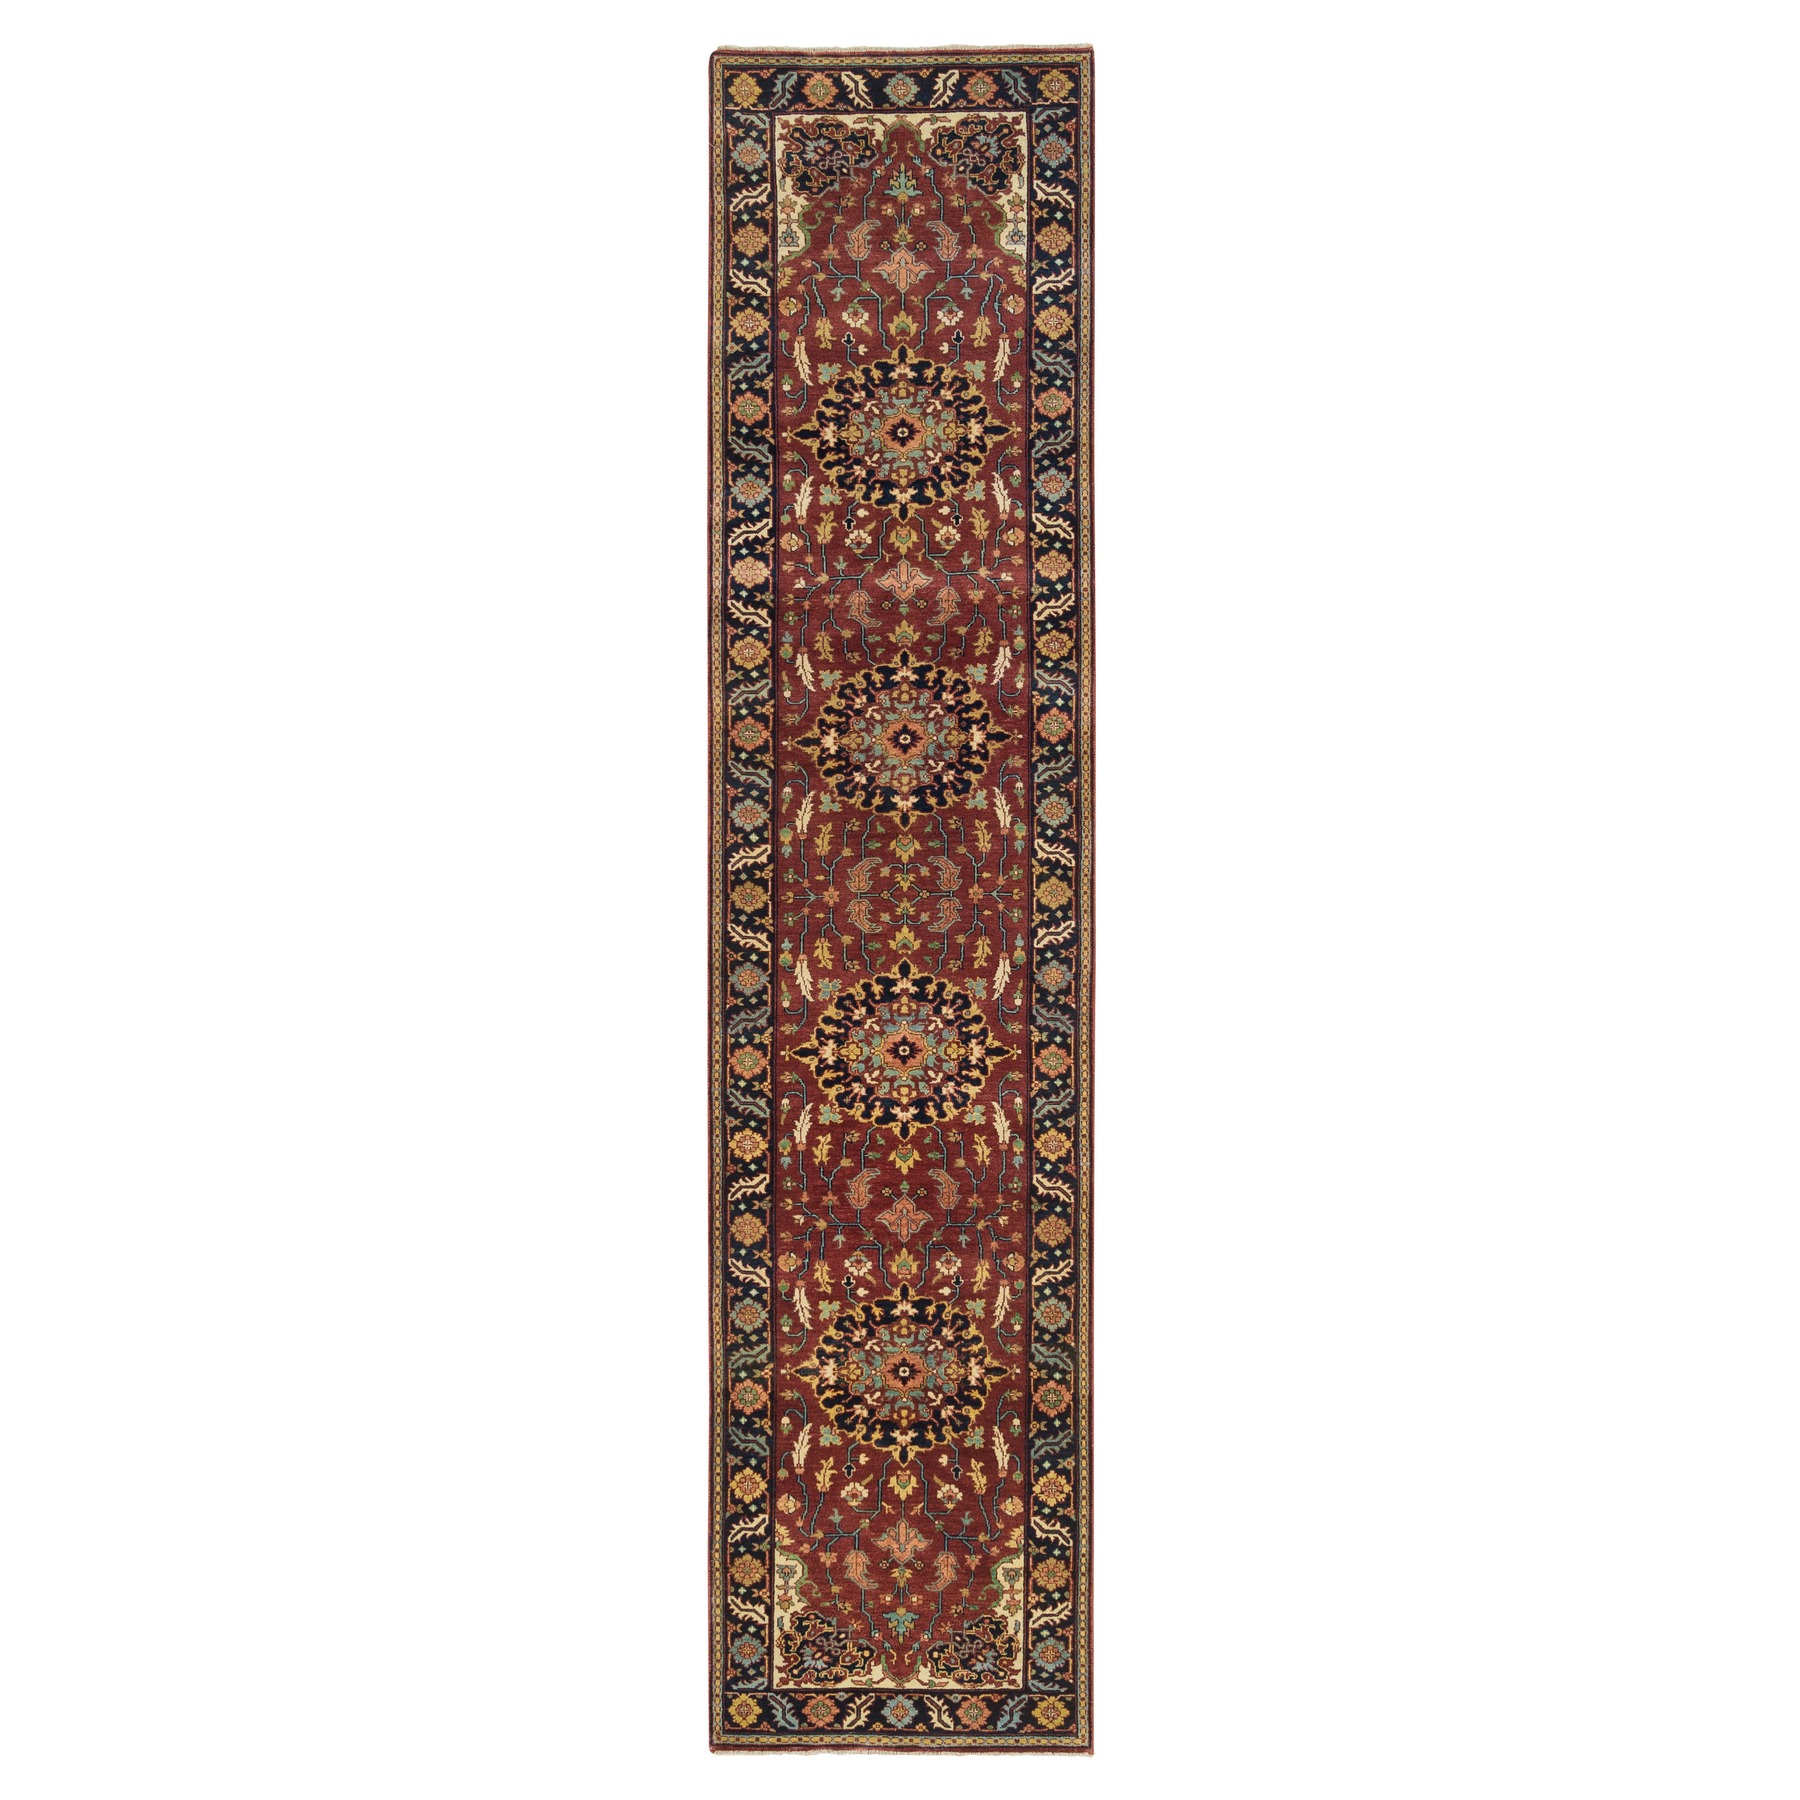  Wool Hand-Knotted Area Rug 2'7